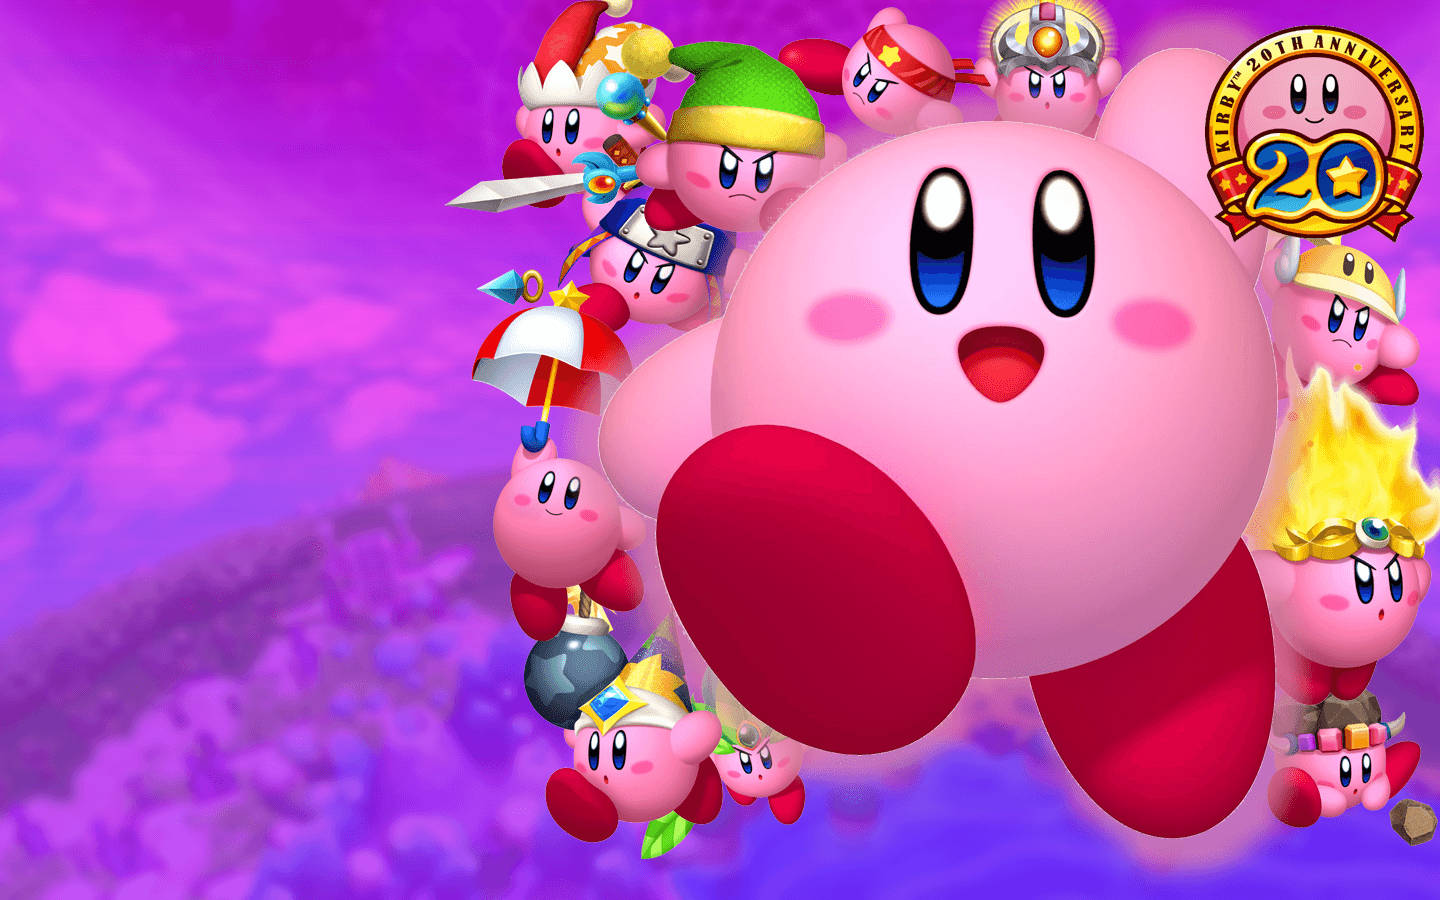 Cool HD and pink aesthetic Kirby wallpaper 